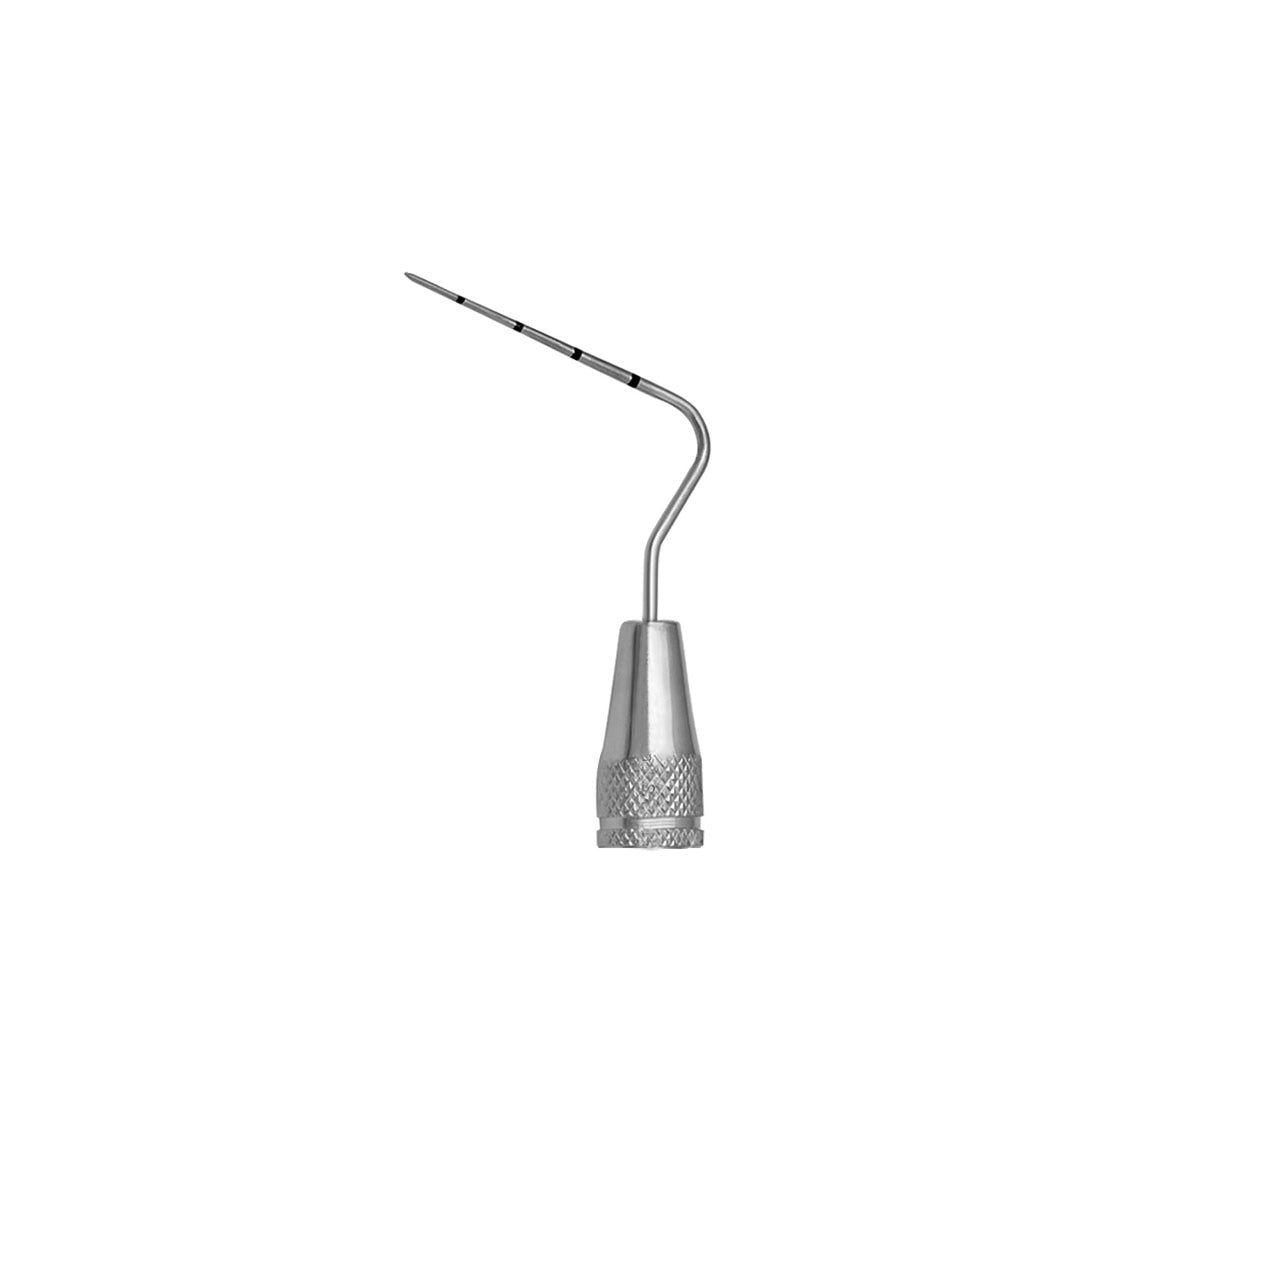 50 ISO Root Canal Spreader